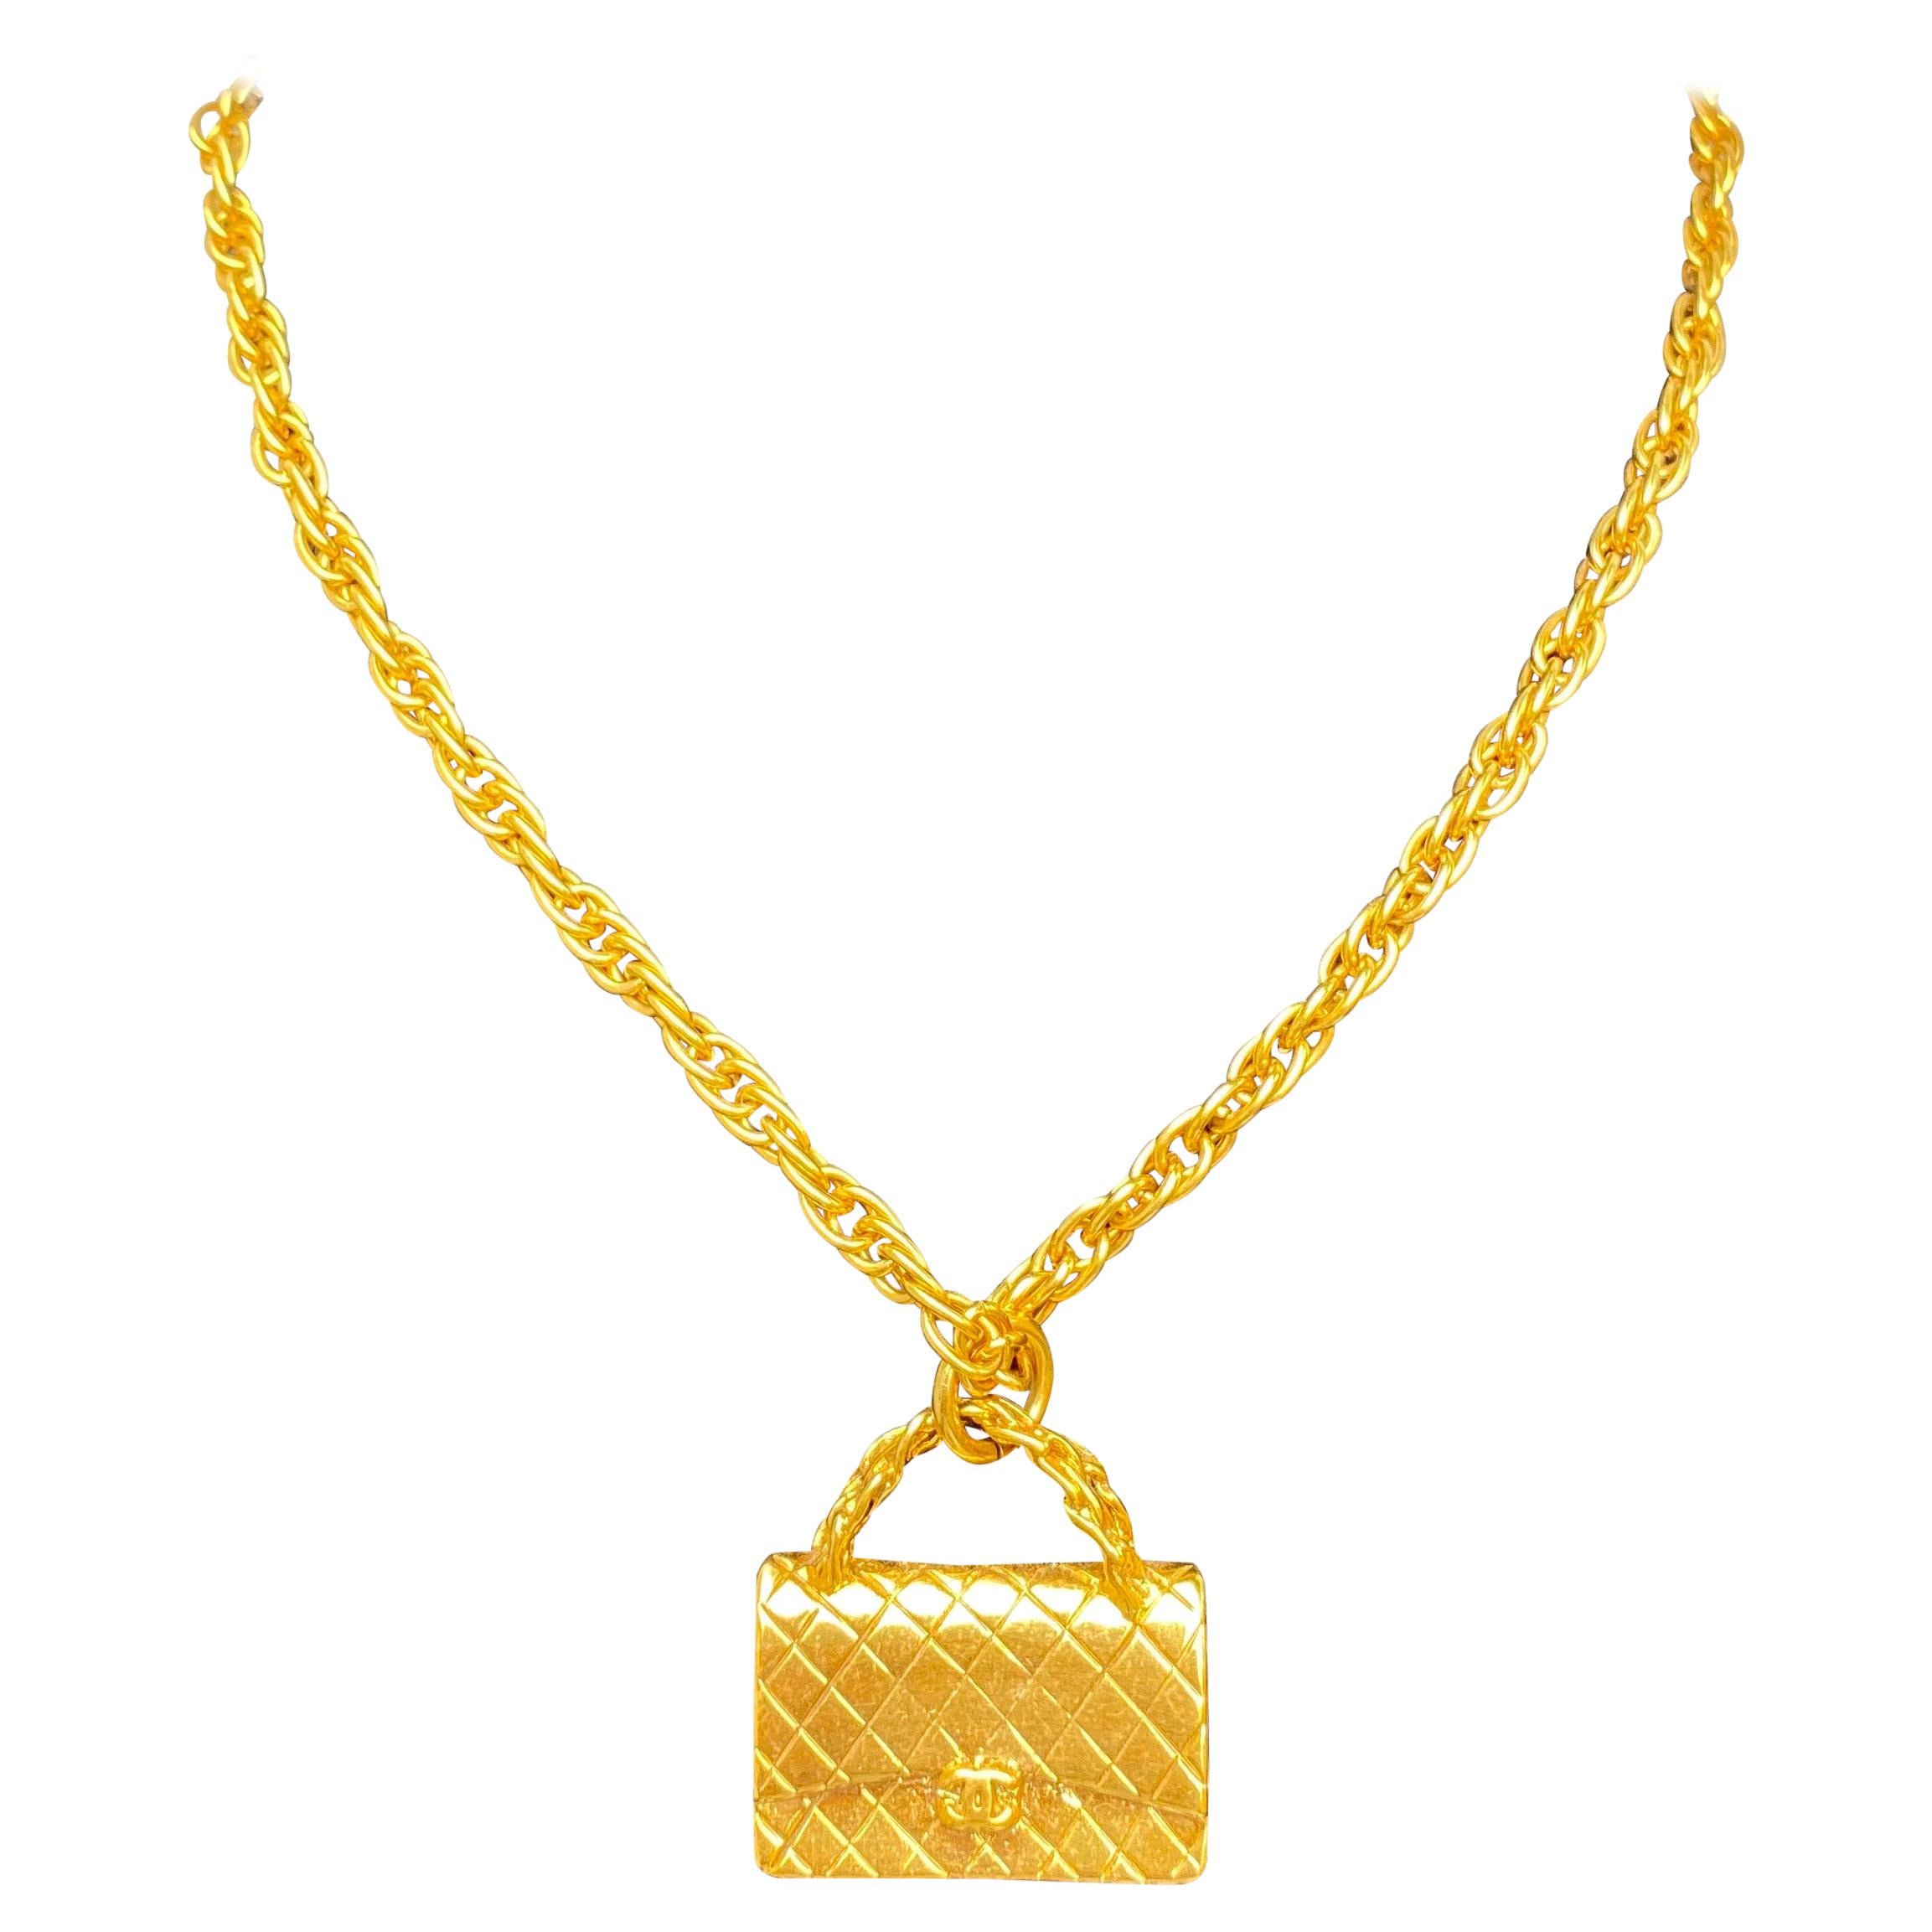 Chanel Classic 2.55 Flap Bag Charm Necklace